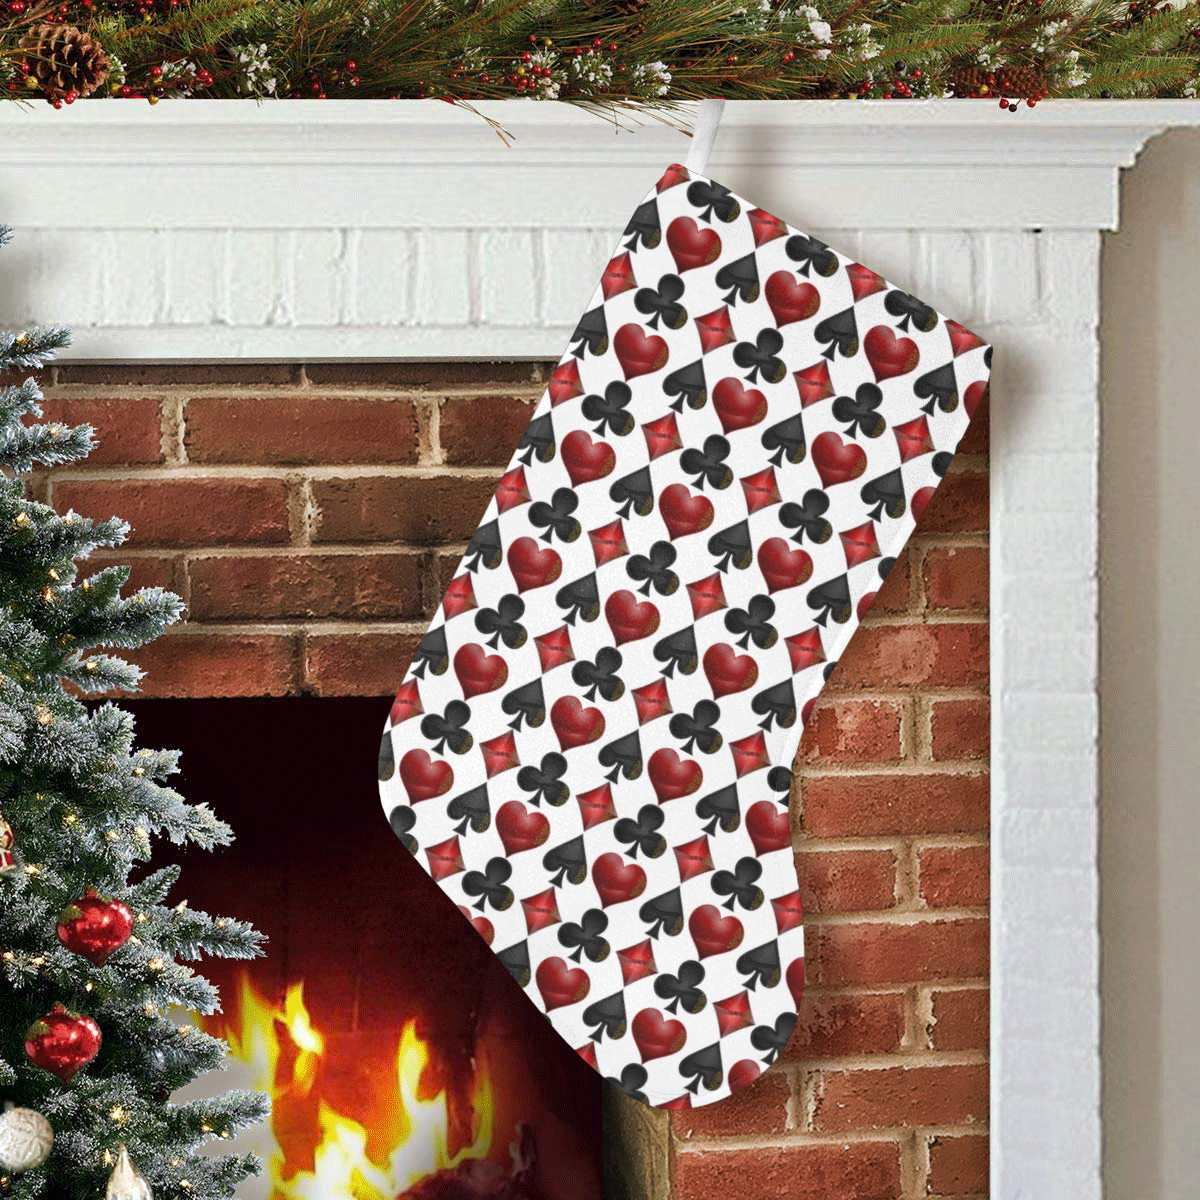 Las Vegas Black and Red Casino Poker Card Shapes Christmas Stocking (Without Folded Top)